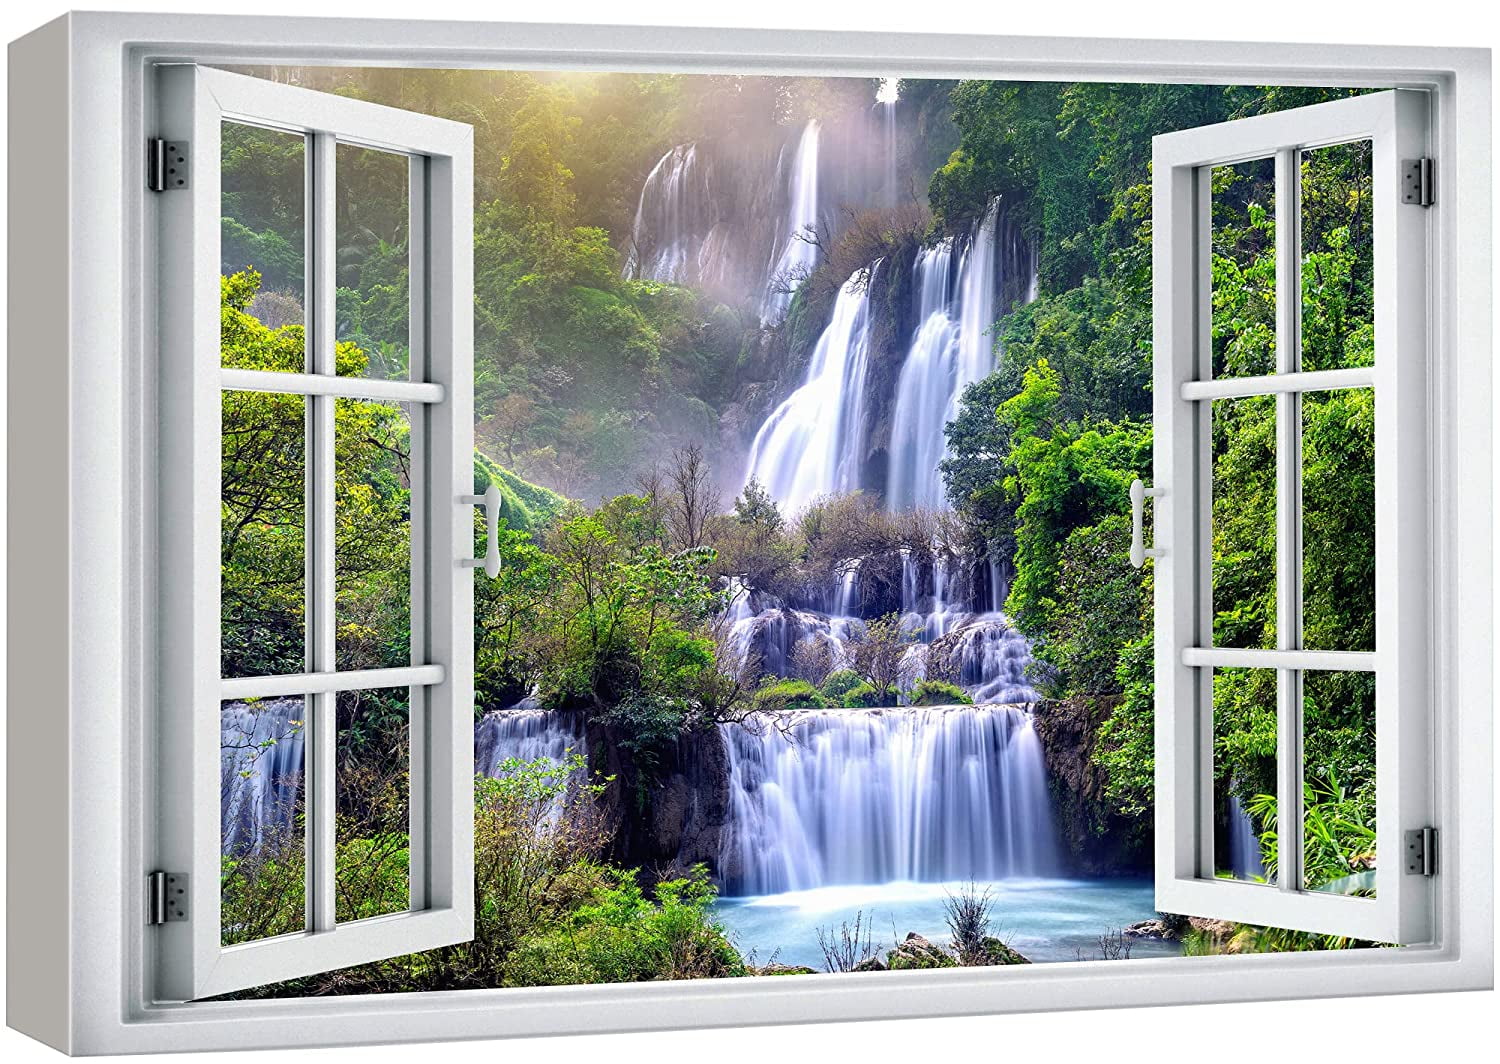 wall26 Canvas Print Wall Art Window View Rustic Waterfall Rapid Lake Stream River  Wilderness Nature Photography Realism Scenic Landscape Multicolor for Living  Room, Bedroom, Office 24